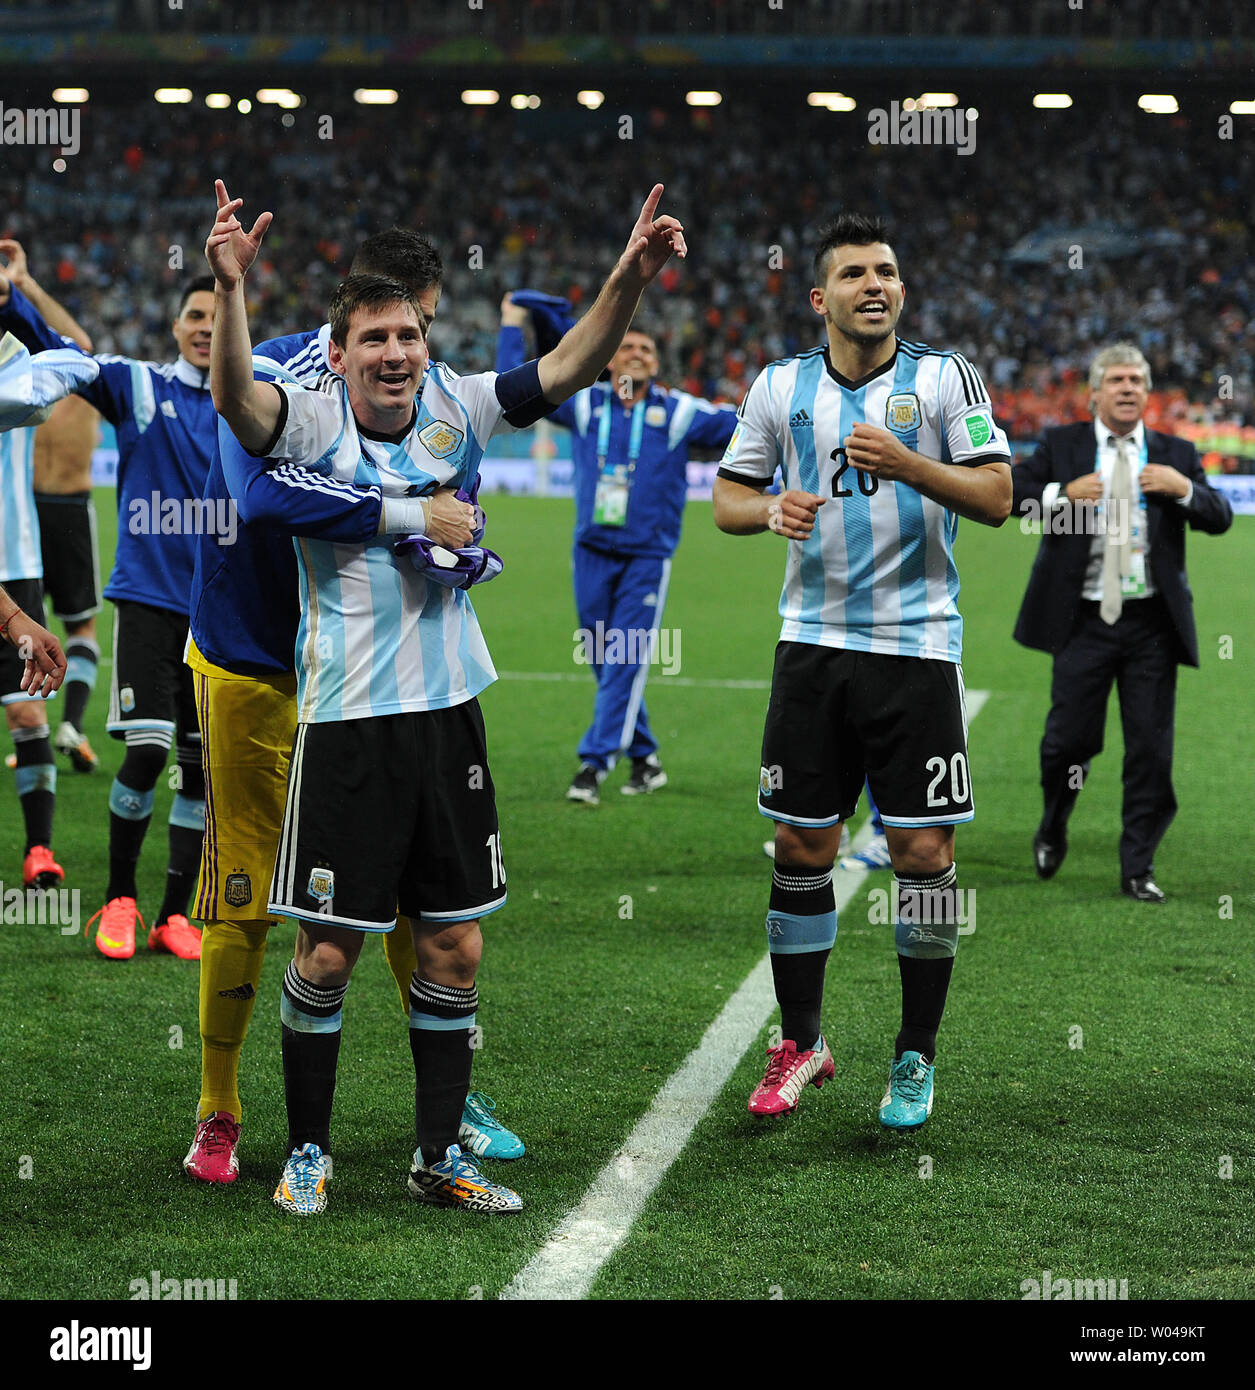 Lionel Messi (L) of Argentina celebrates at full-time following the 2014 FIFA World Cup Semi Final match at the Arena Corinthians in Sao Paulo, Brazil on July 09, 2014. UPI/Chris Brunskill Stock Photo